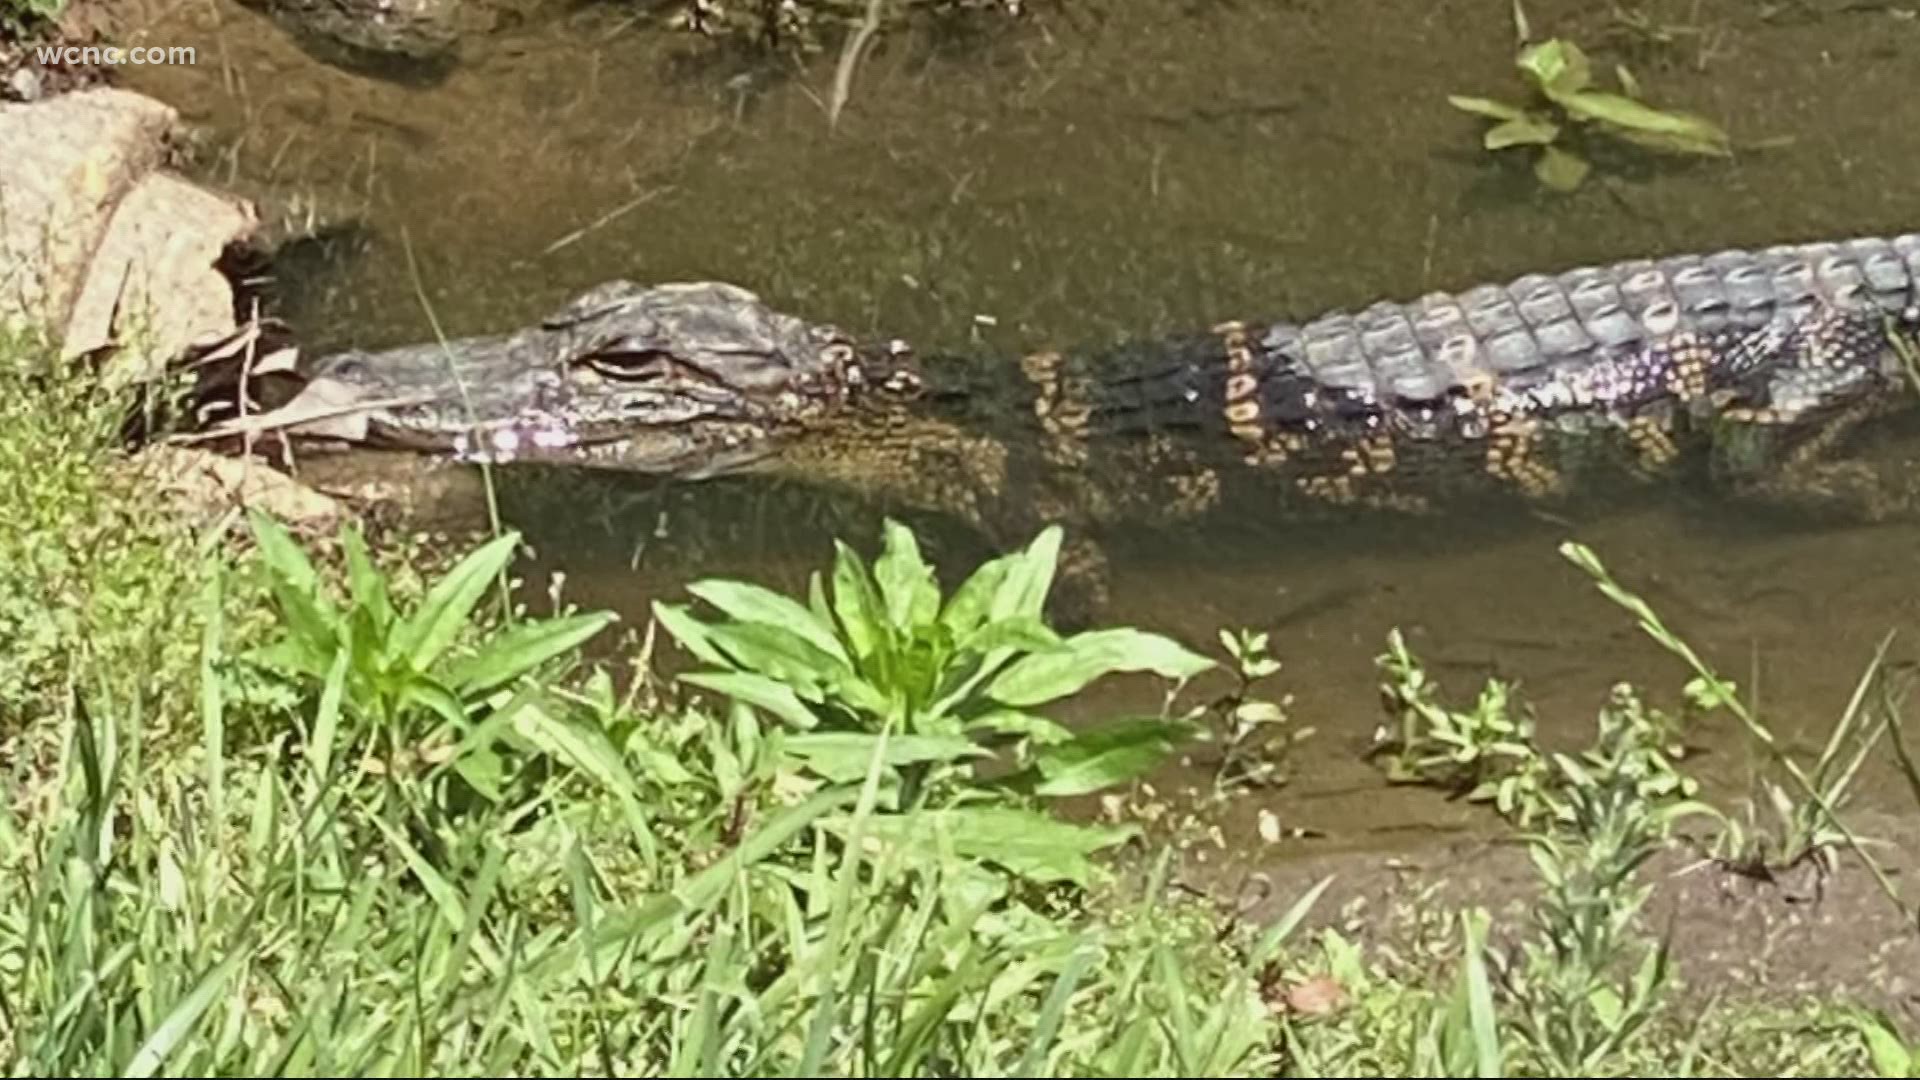 Wildlife officers believe the alligator might have previously been a pet.